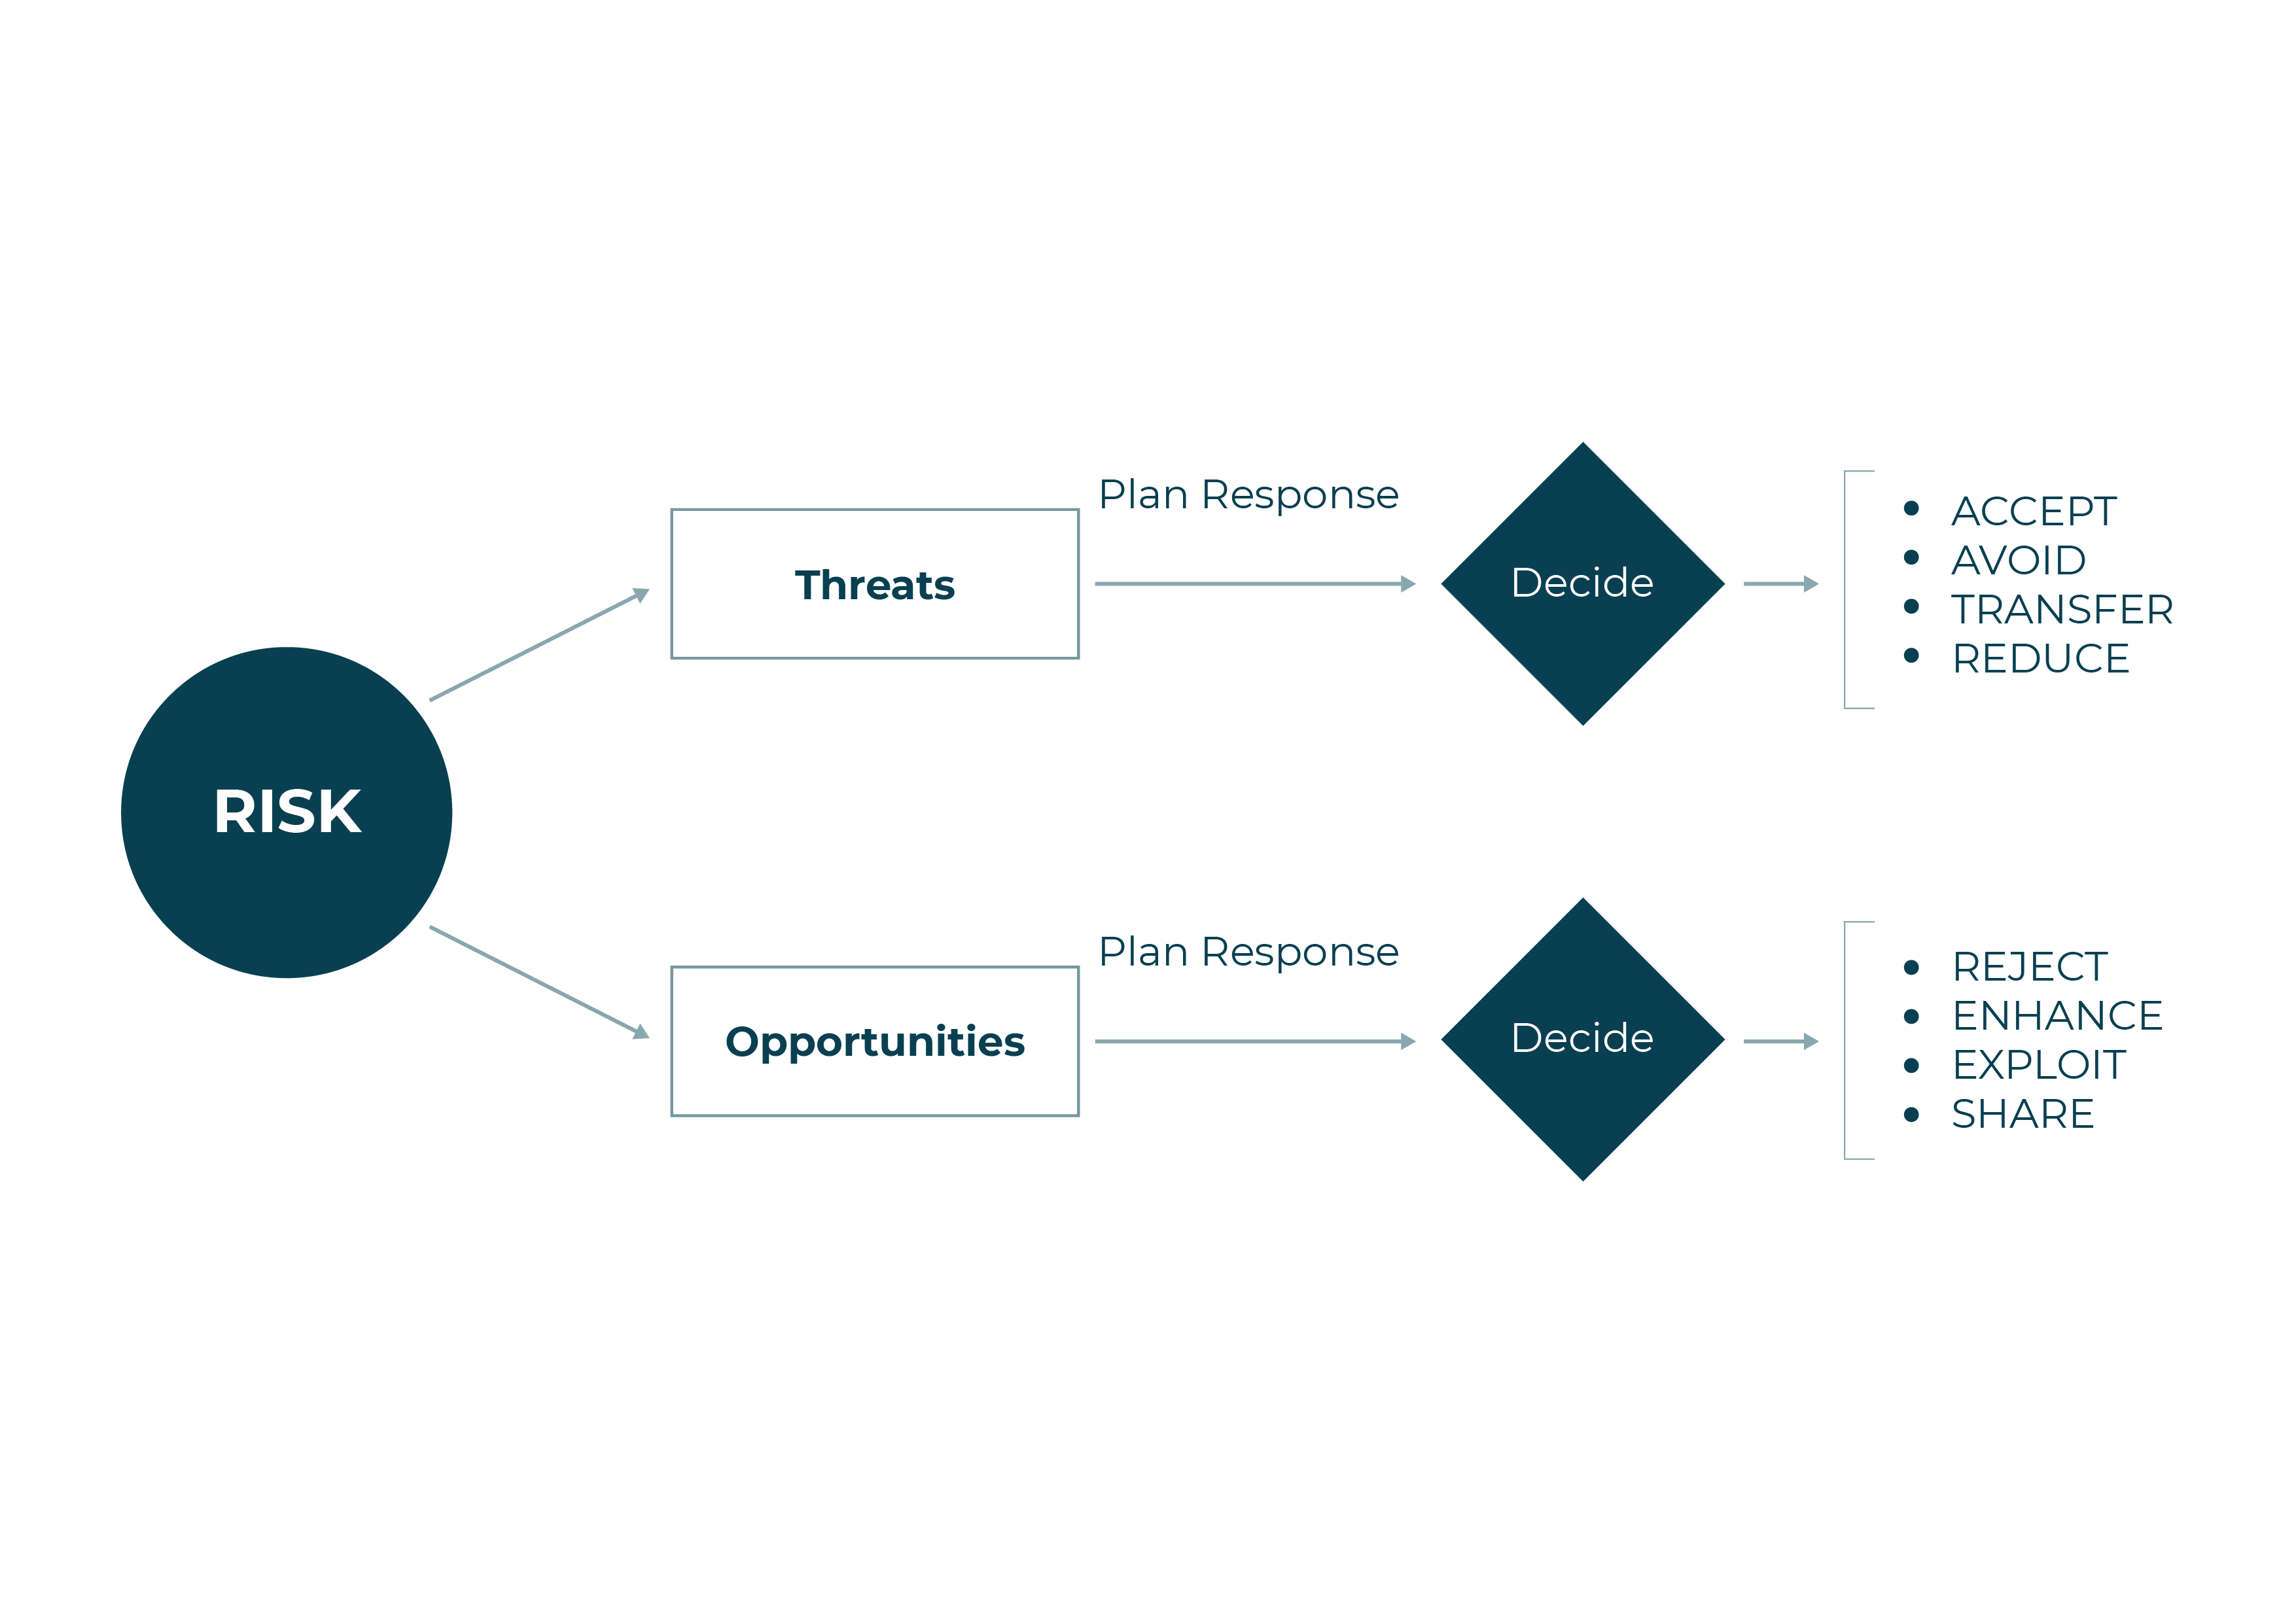 An example flowchart showing risks split into threats and opportunities, then plan response, then decide